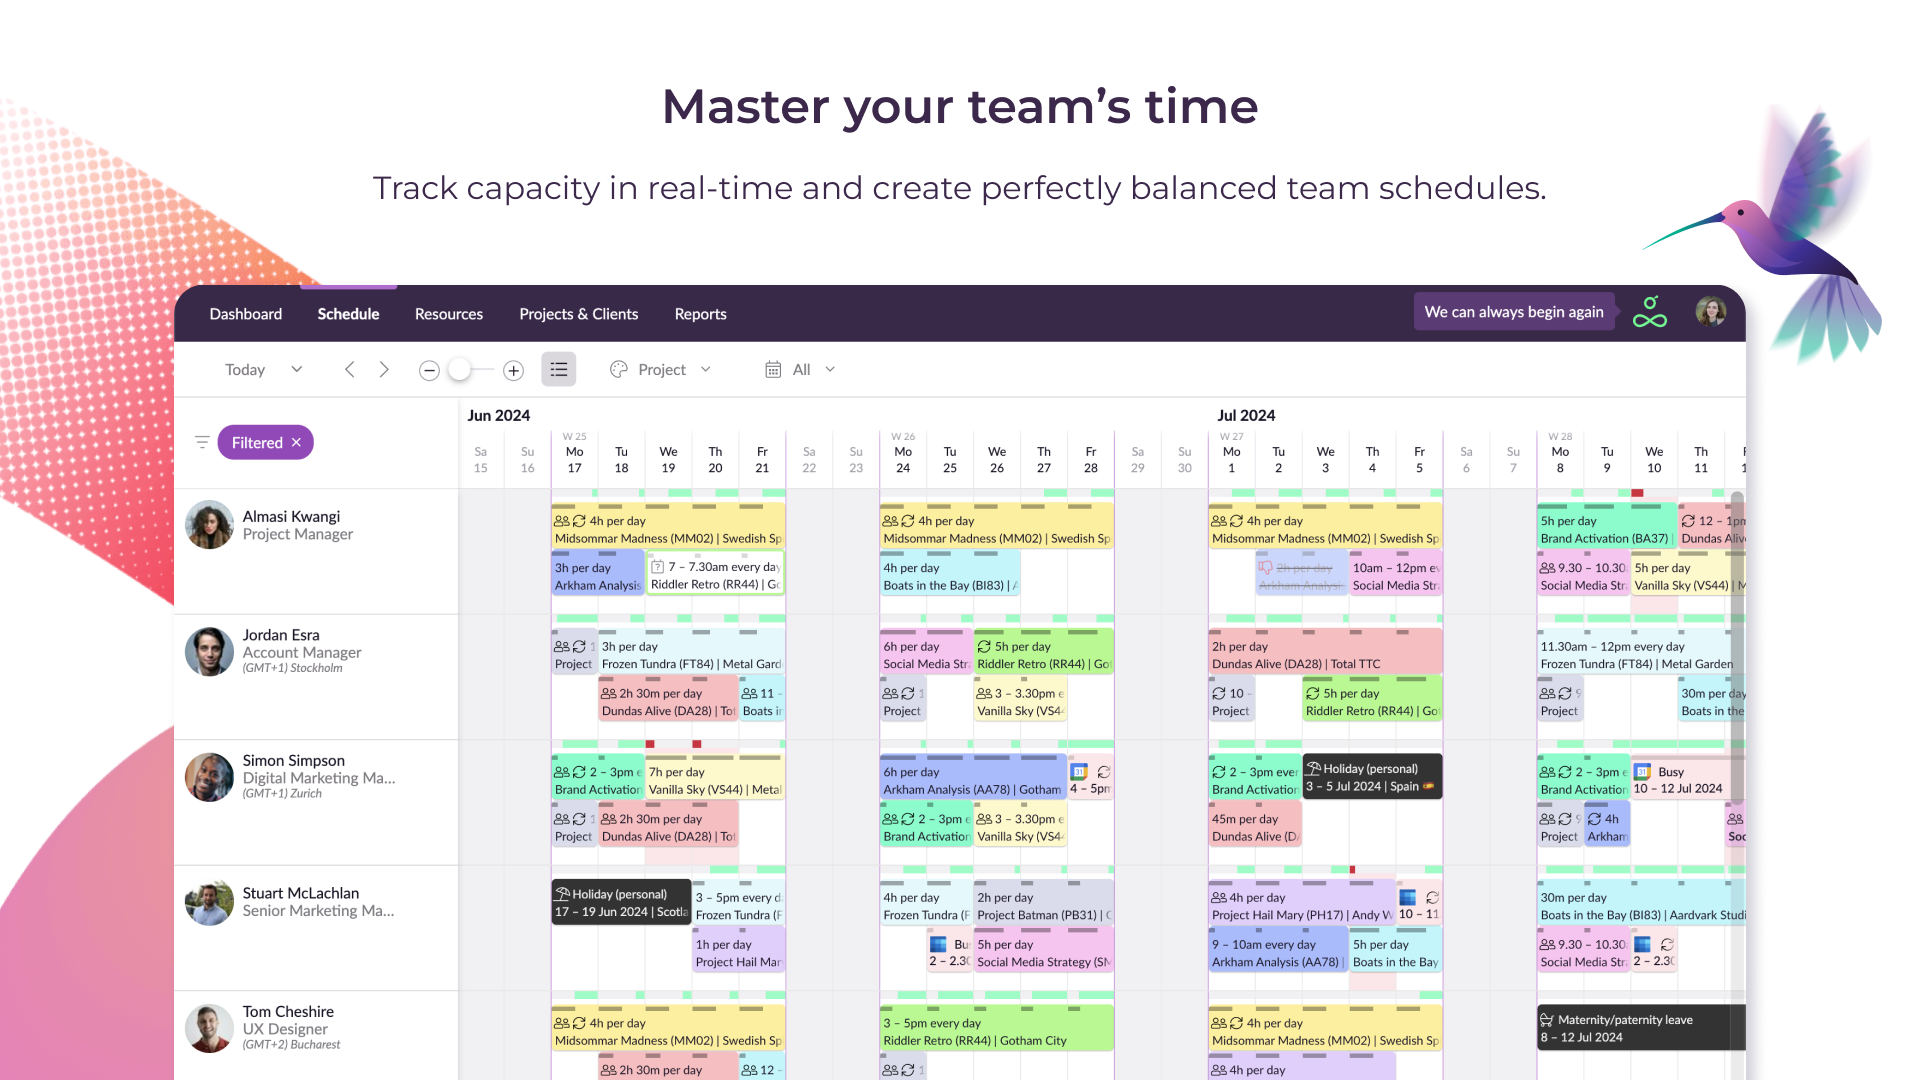 Master your team’s time. Track capacity in real-time and create perfectly balanced team schedules.